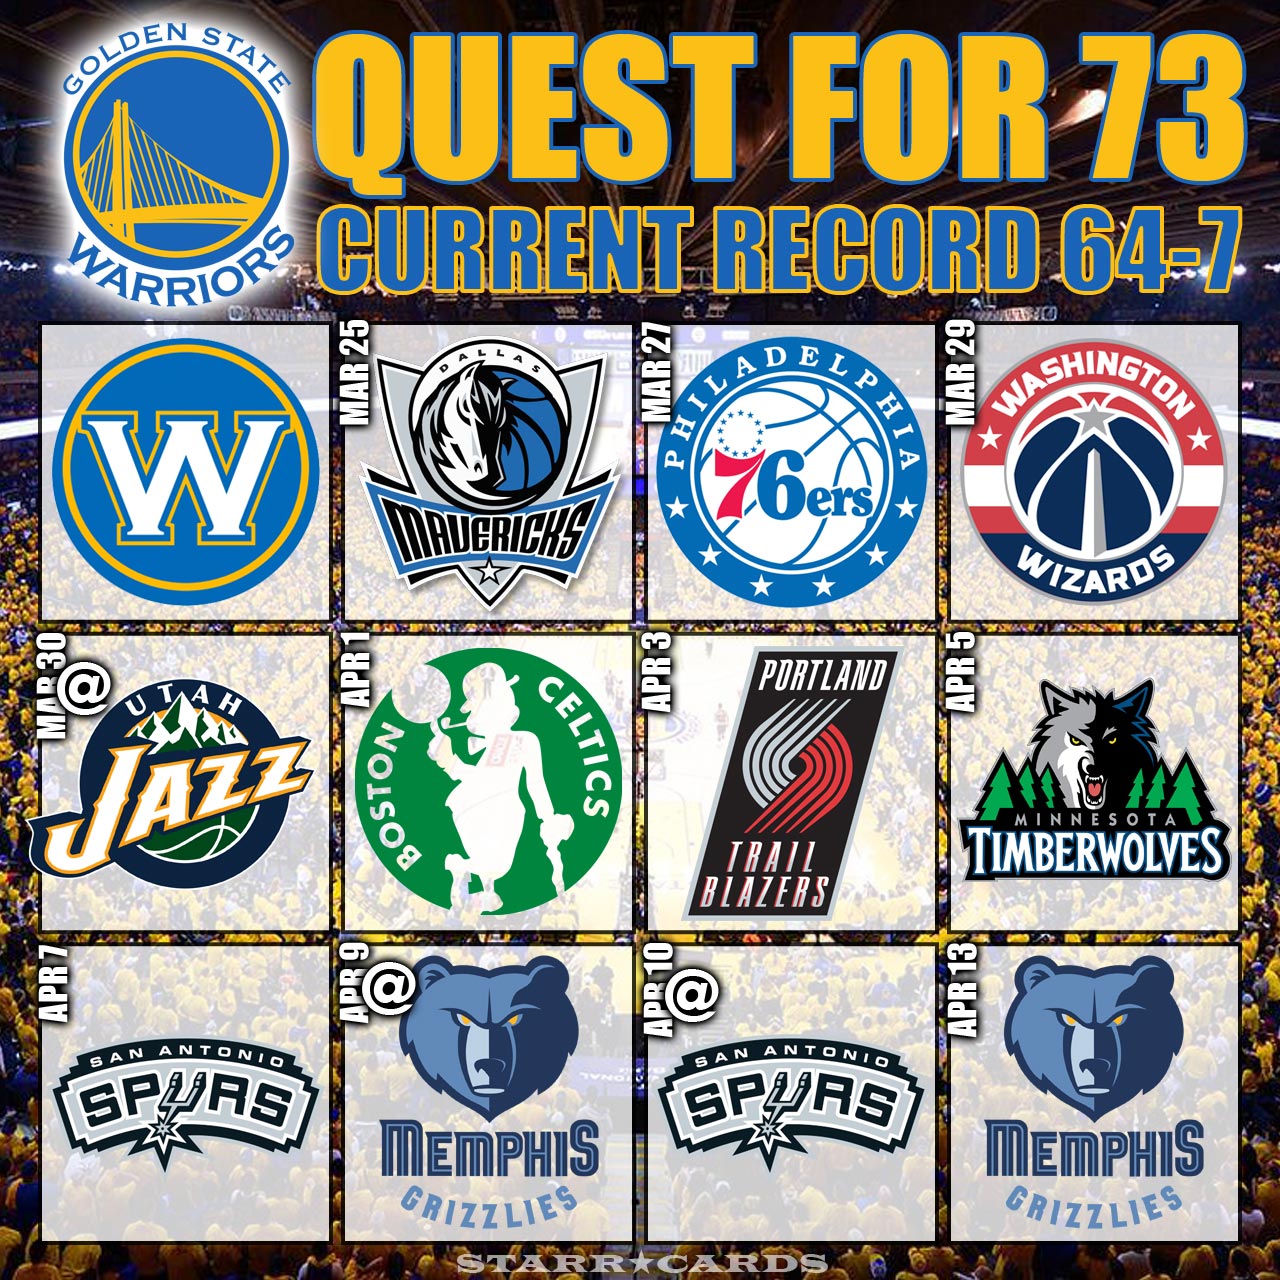 Quest for 73 wins: Warriors move to 64-7